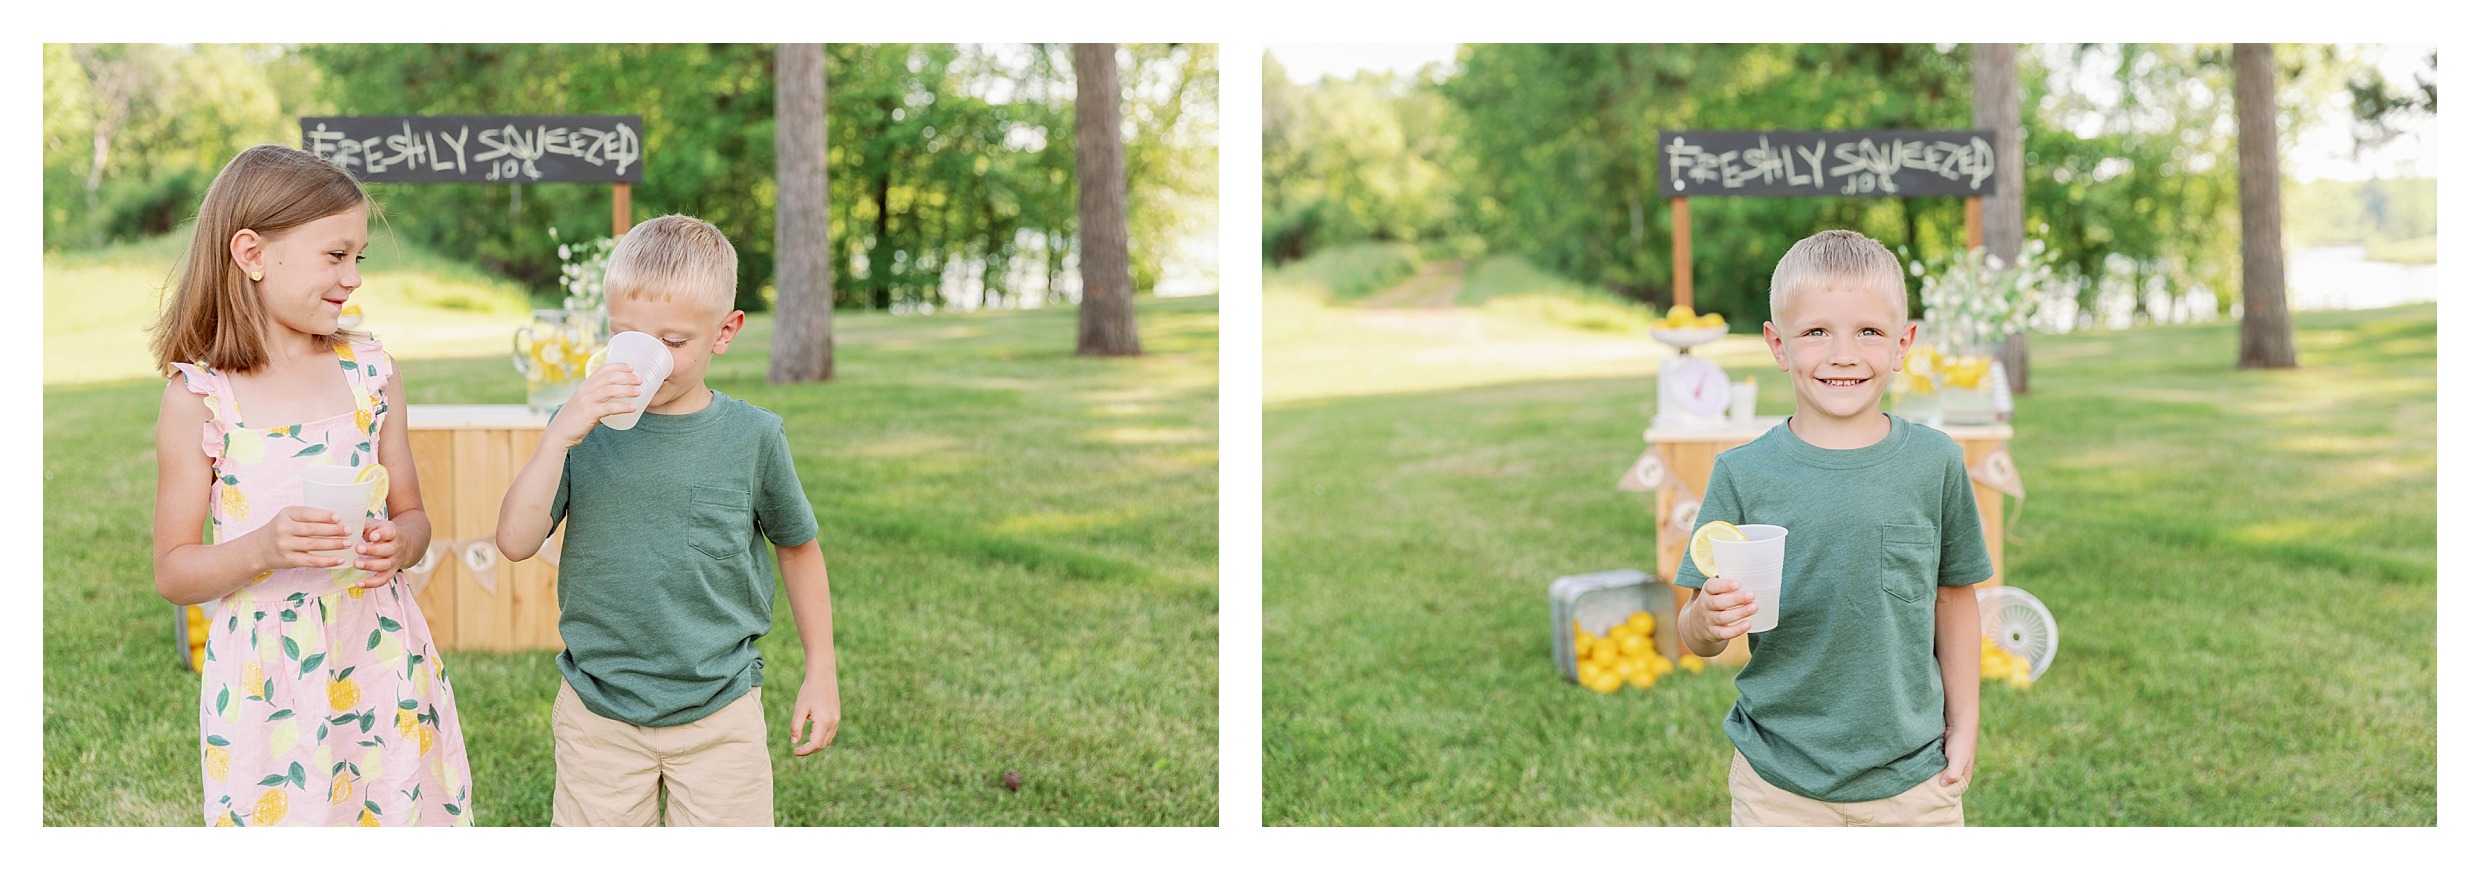 brother poses with his sister at the lemonade stand mini session in Wausau, WI at Sunnyvale Park